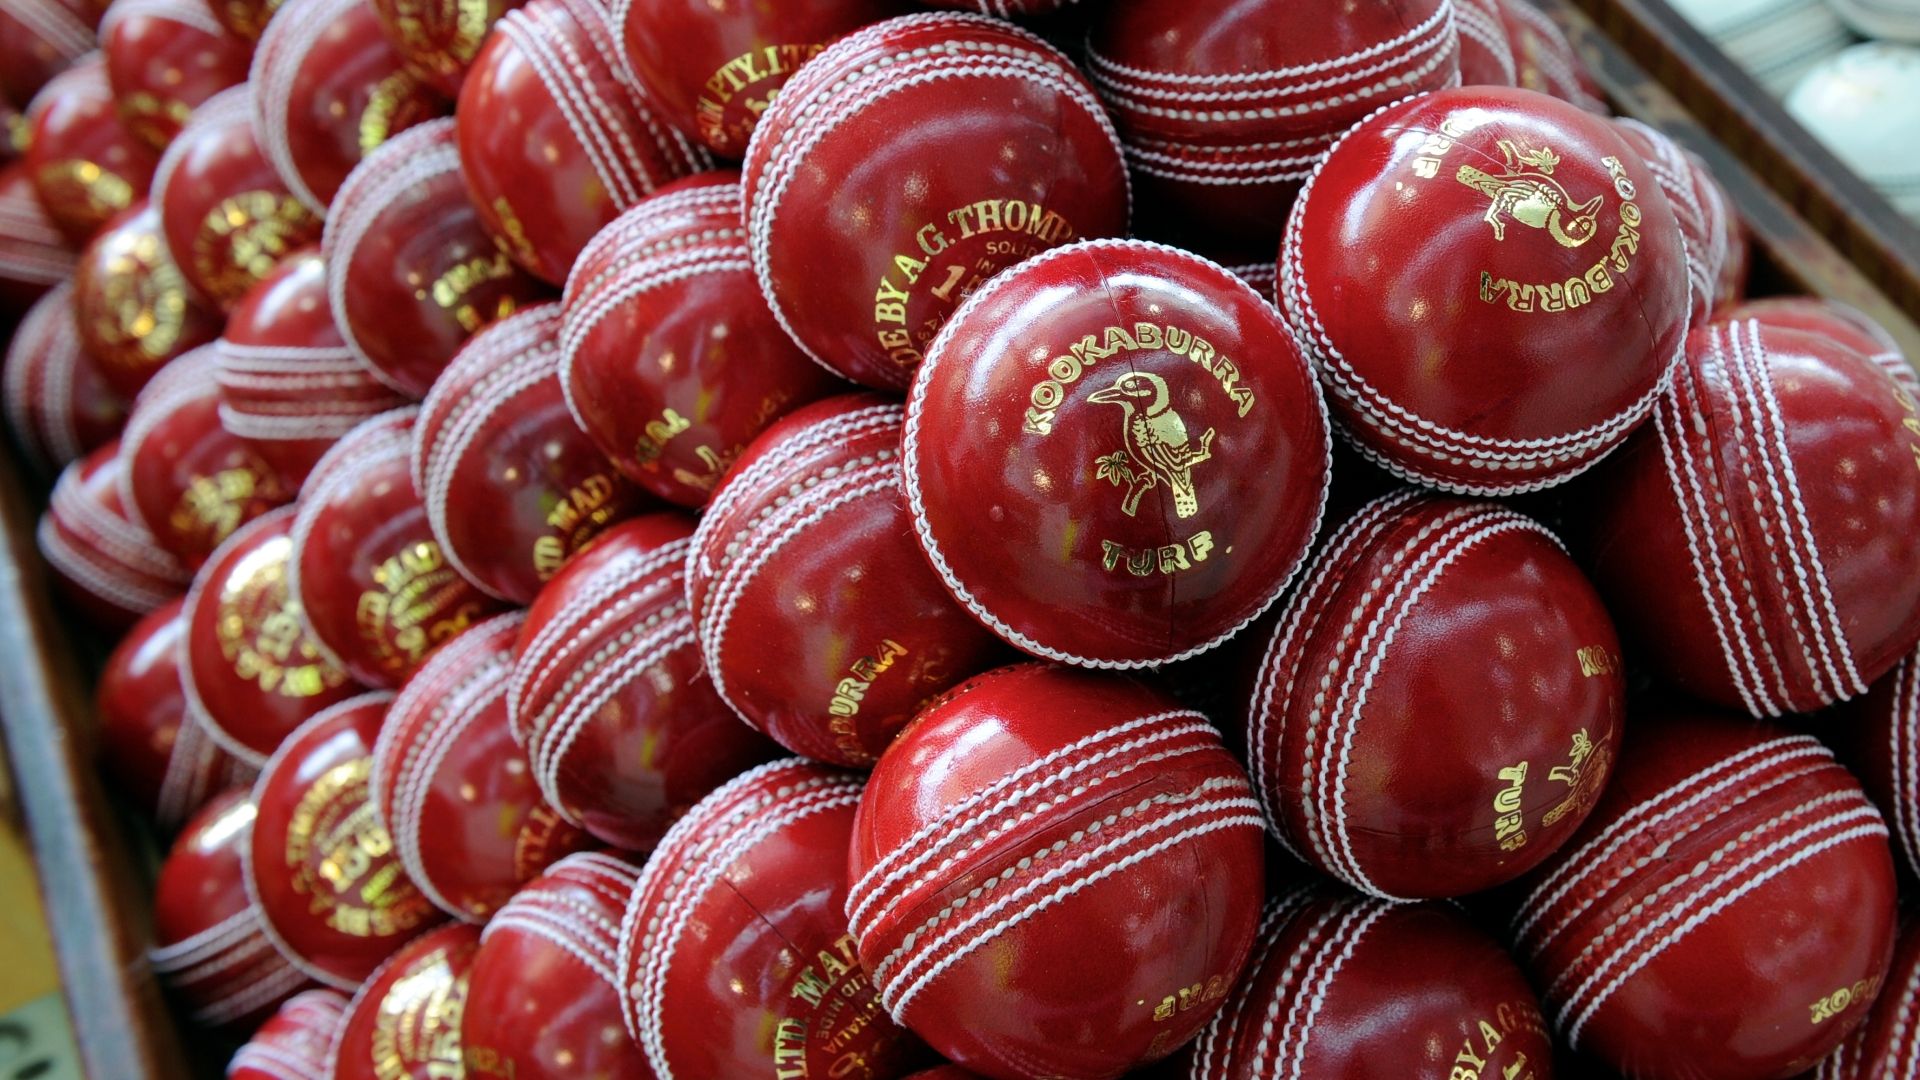 The Australian ball manufacturing company Kookaburra is developing a wax applicator for ball-shining to avoid usage of sweat or saliva.